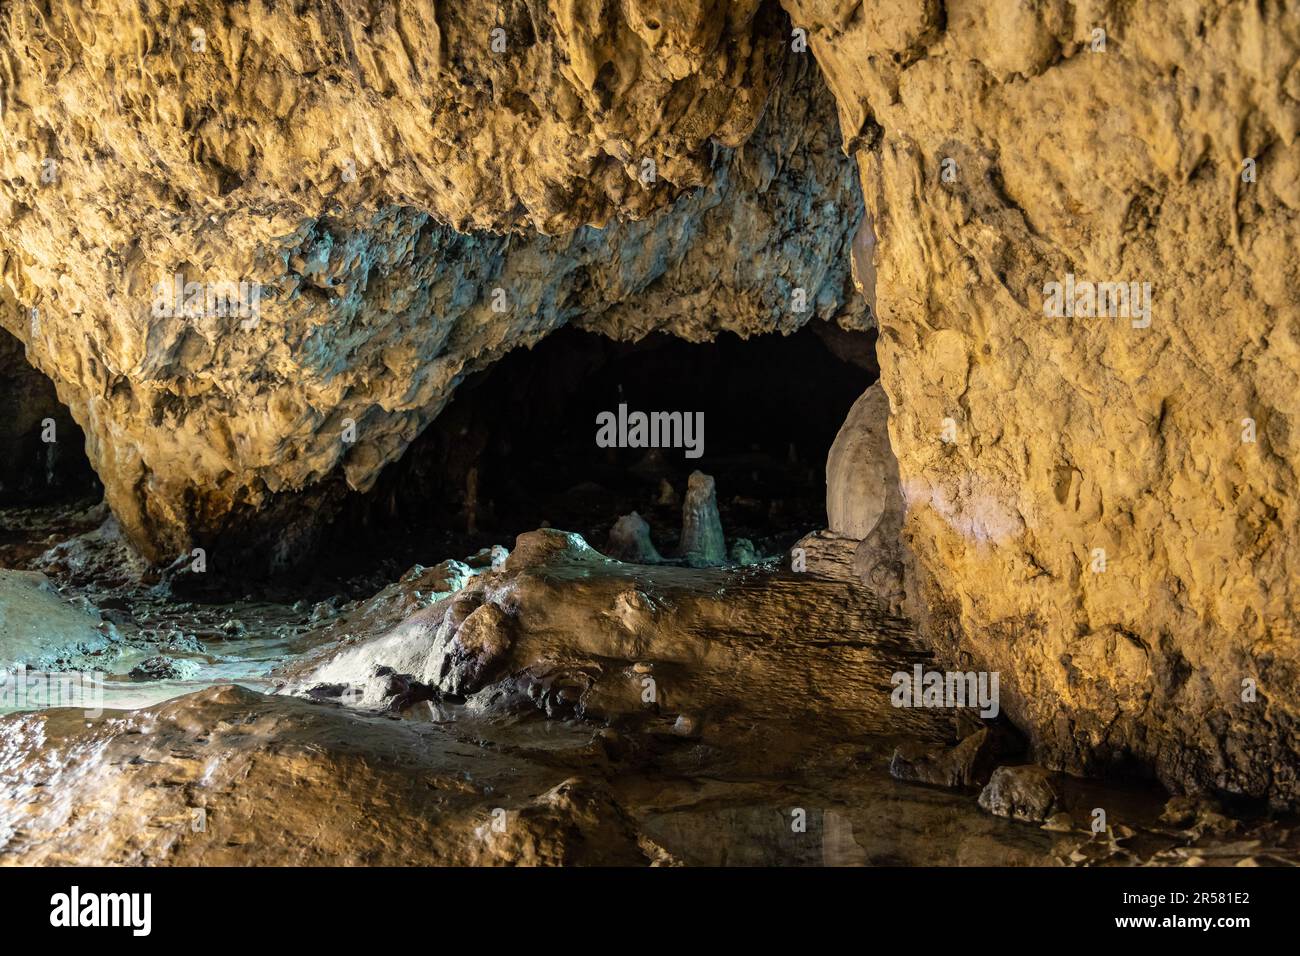 Limestone Bat Cave Jaskinia Nietoperzowa known for multiple species of nesting bats in Jerzmanowice village in Bedkowska Valley near Cracow in Poland Stock Photo